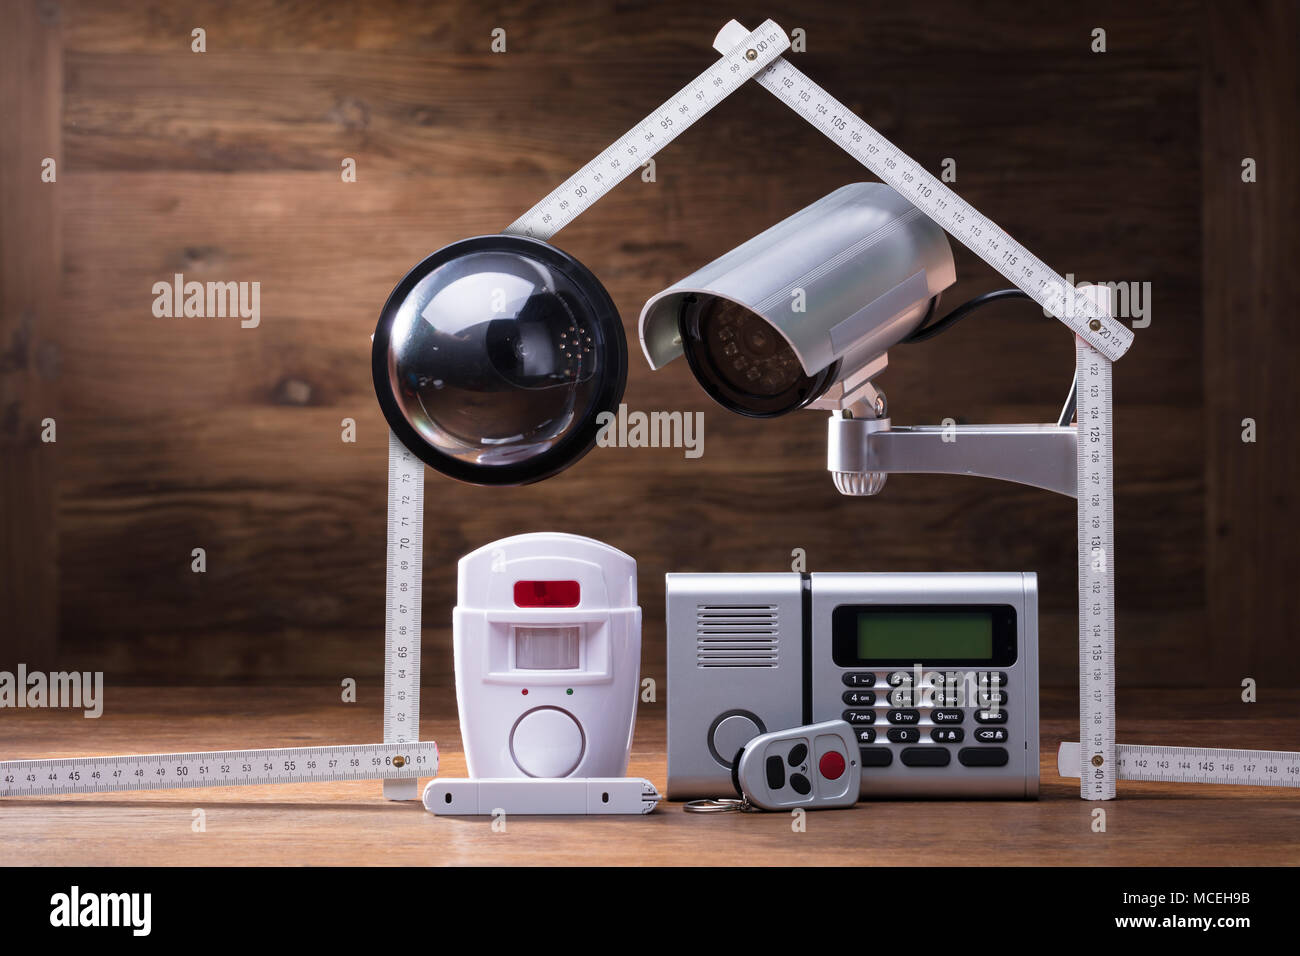 CCTV Camera And Security Alarm System Under The House Made With Measuring Tape Stock Photo